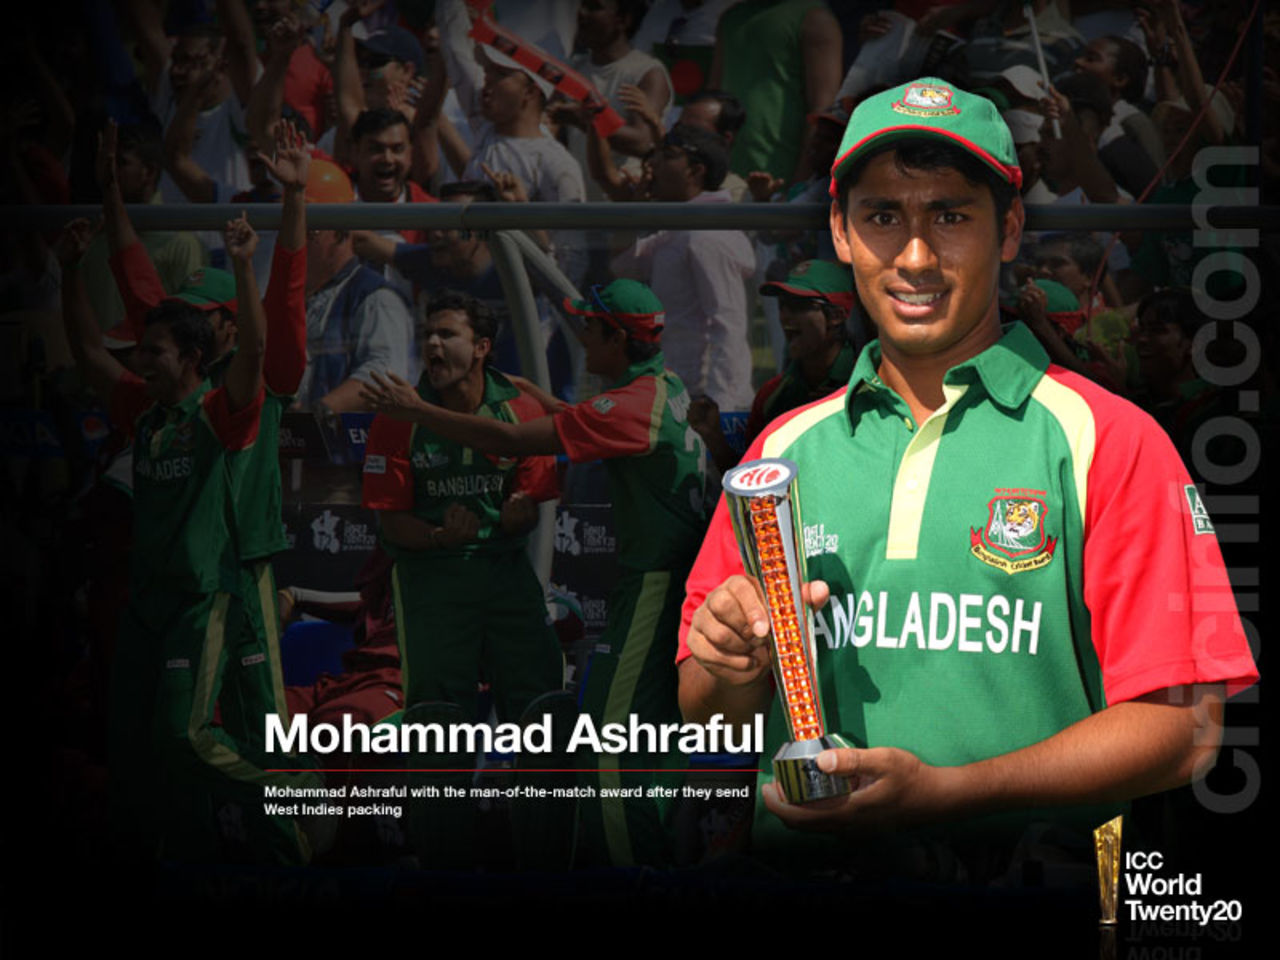 Mohammad Ashraful with the Man-of-the-match award